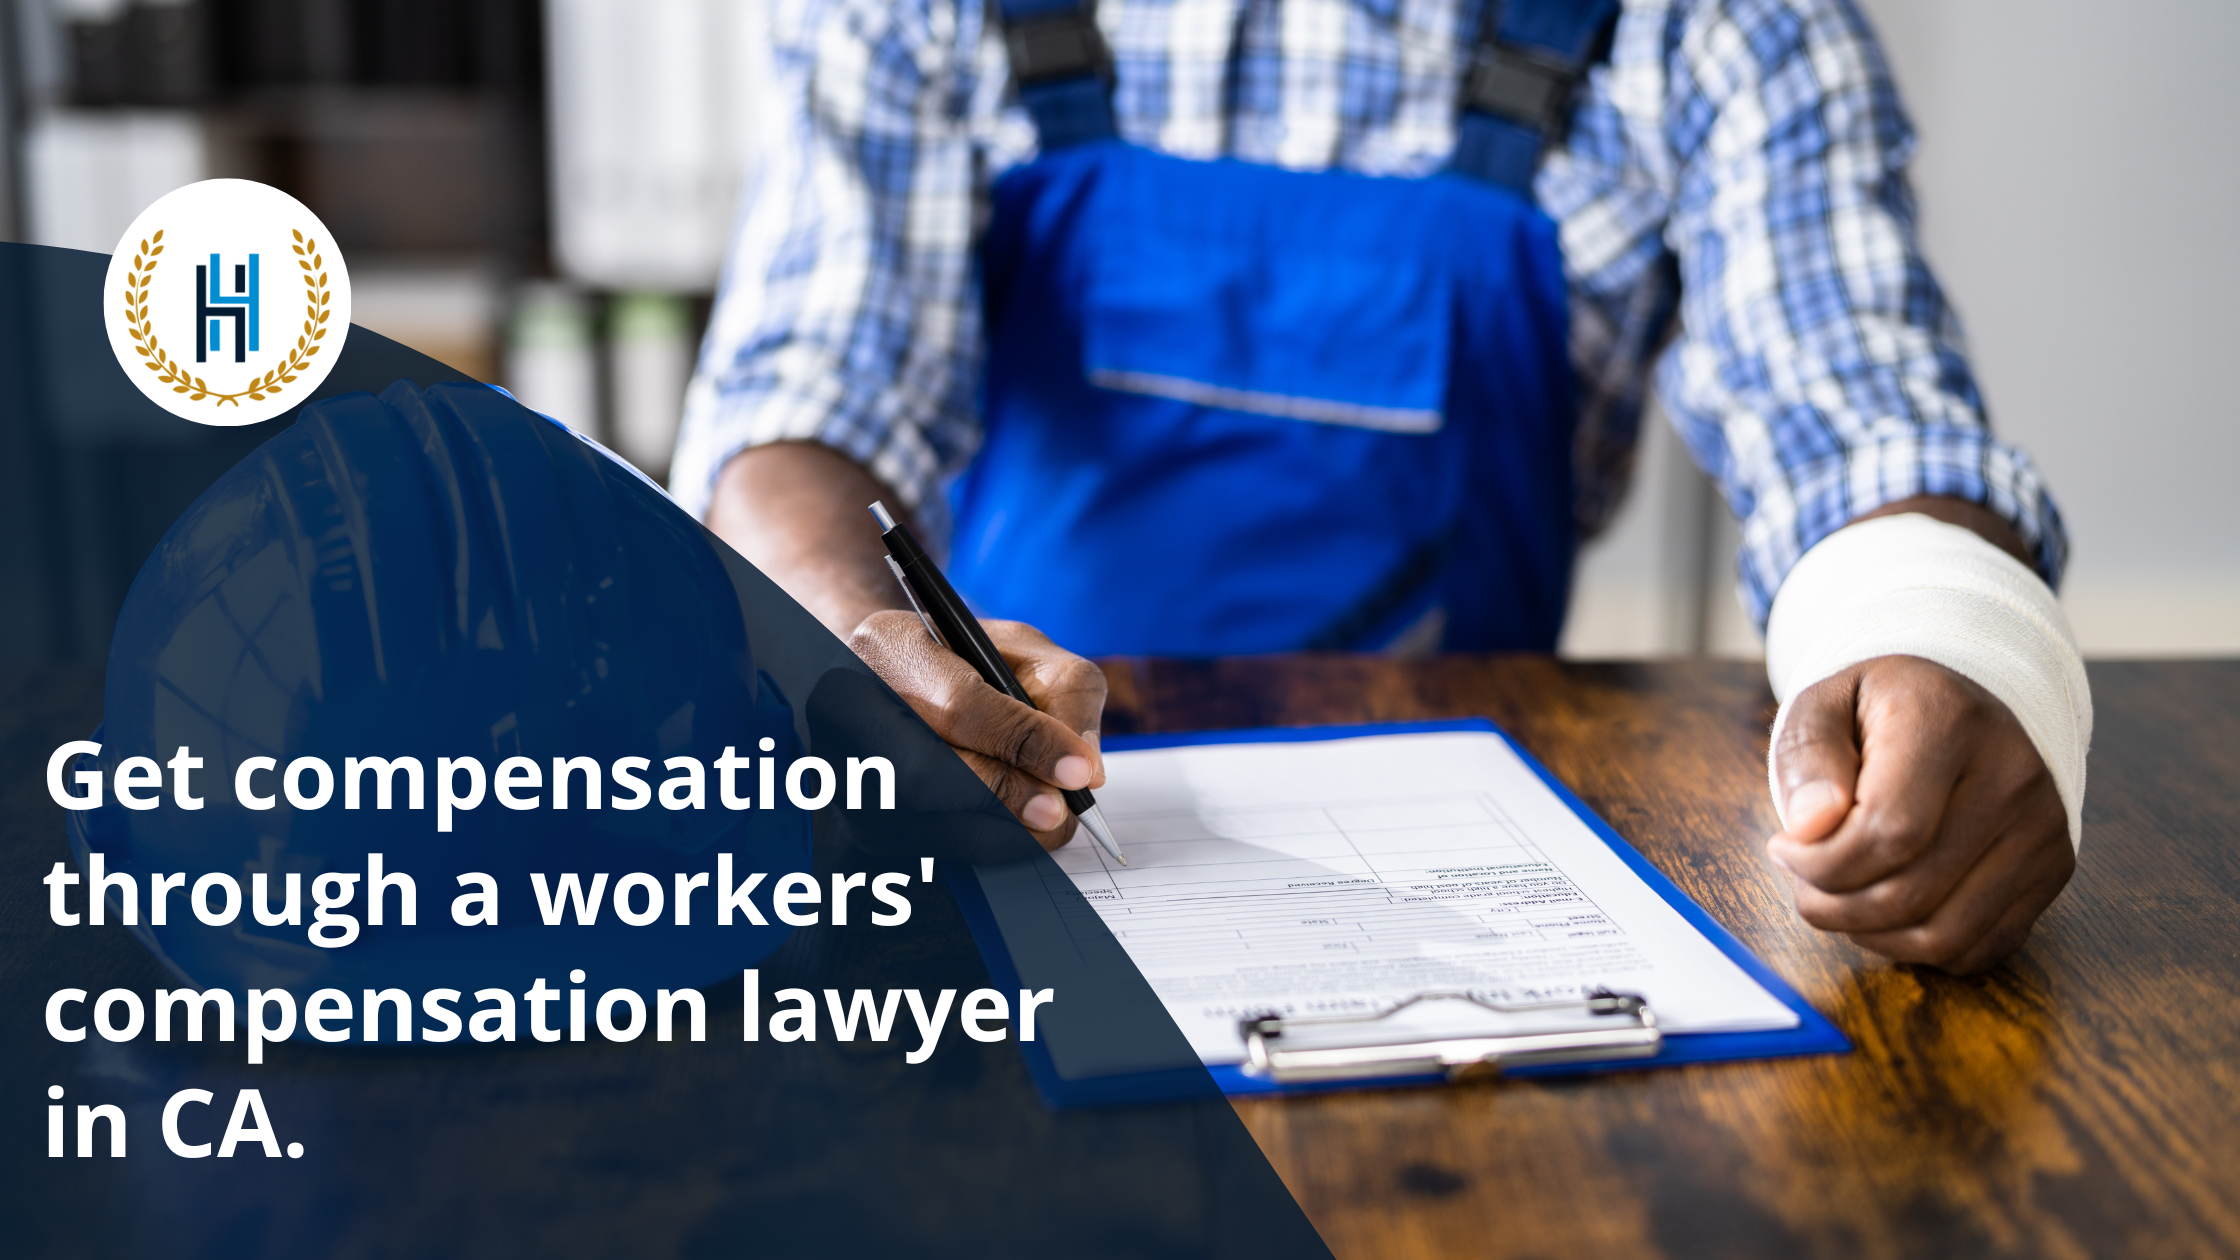 _Get compensation through a workers' compensation lawyer in CA. | 2h Law